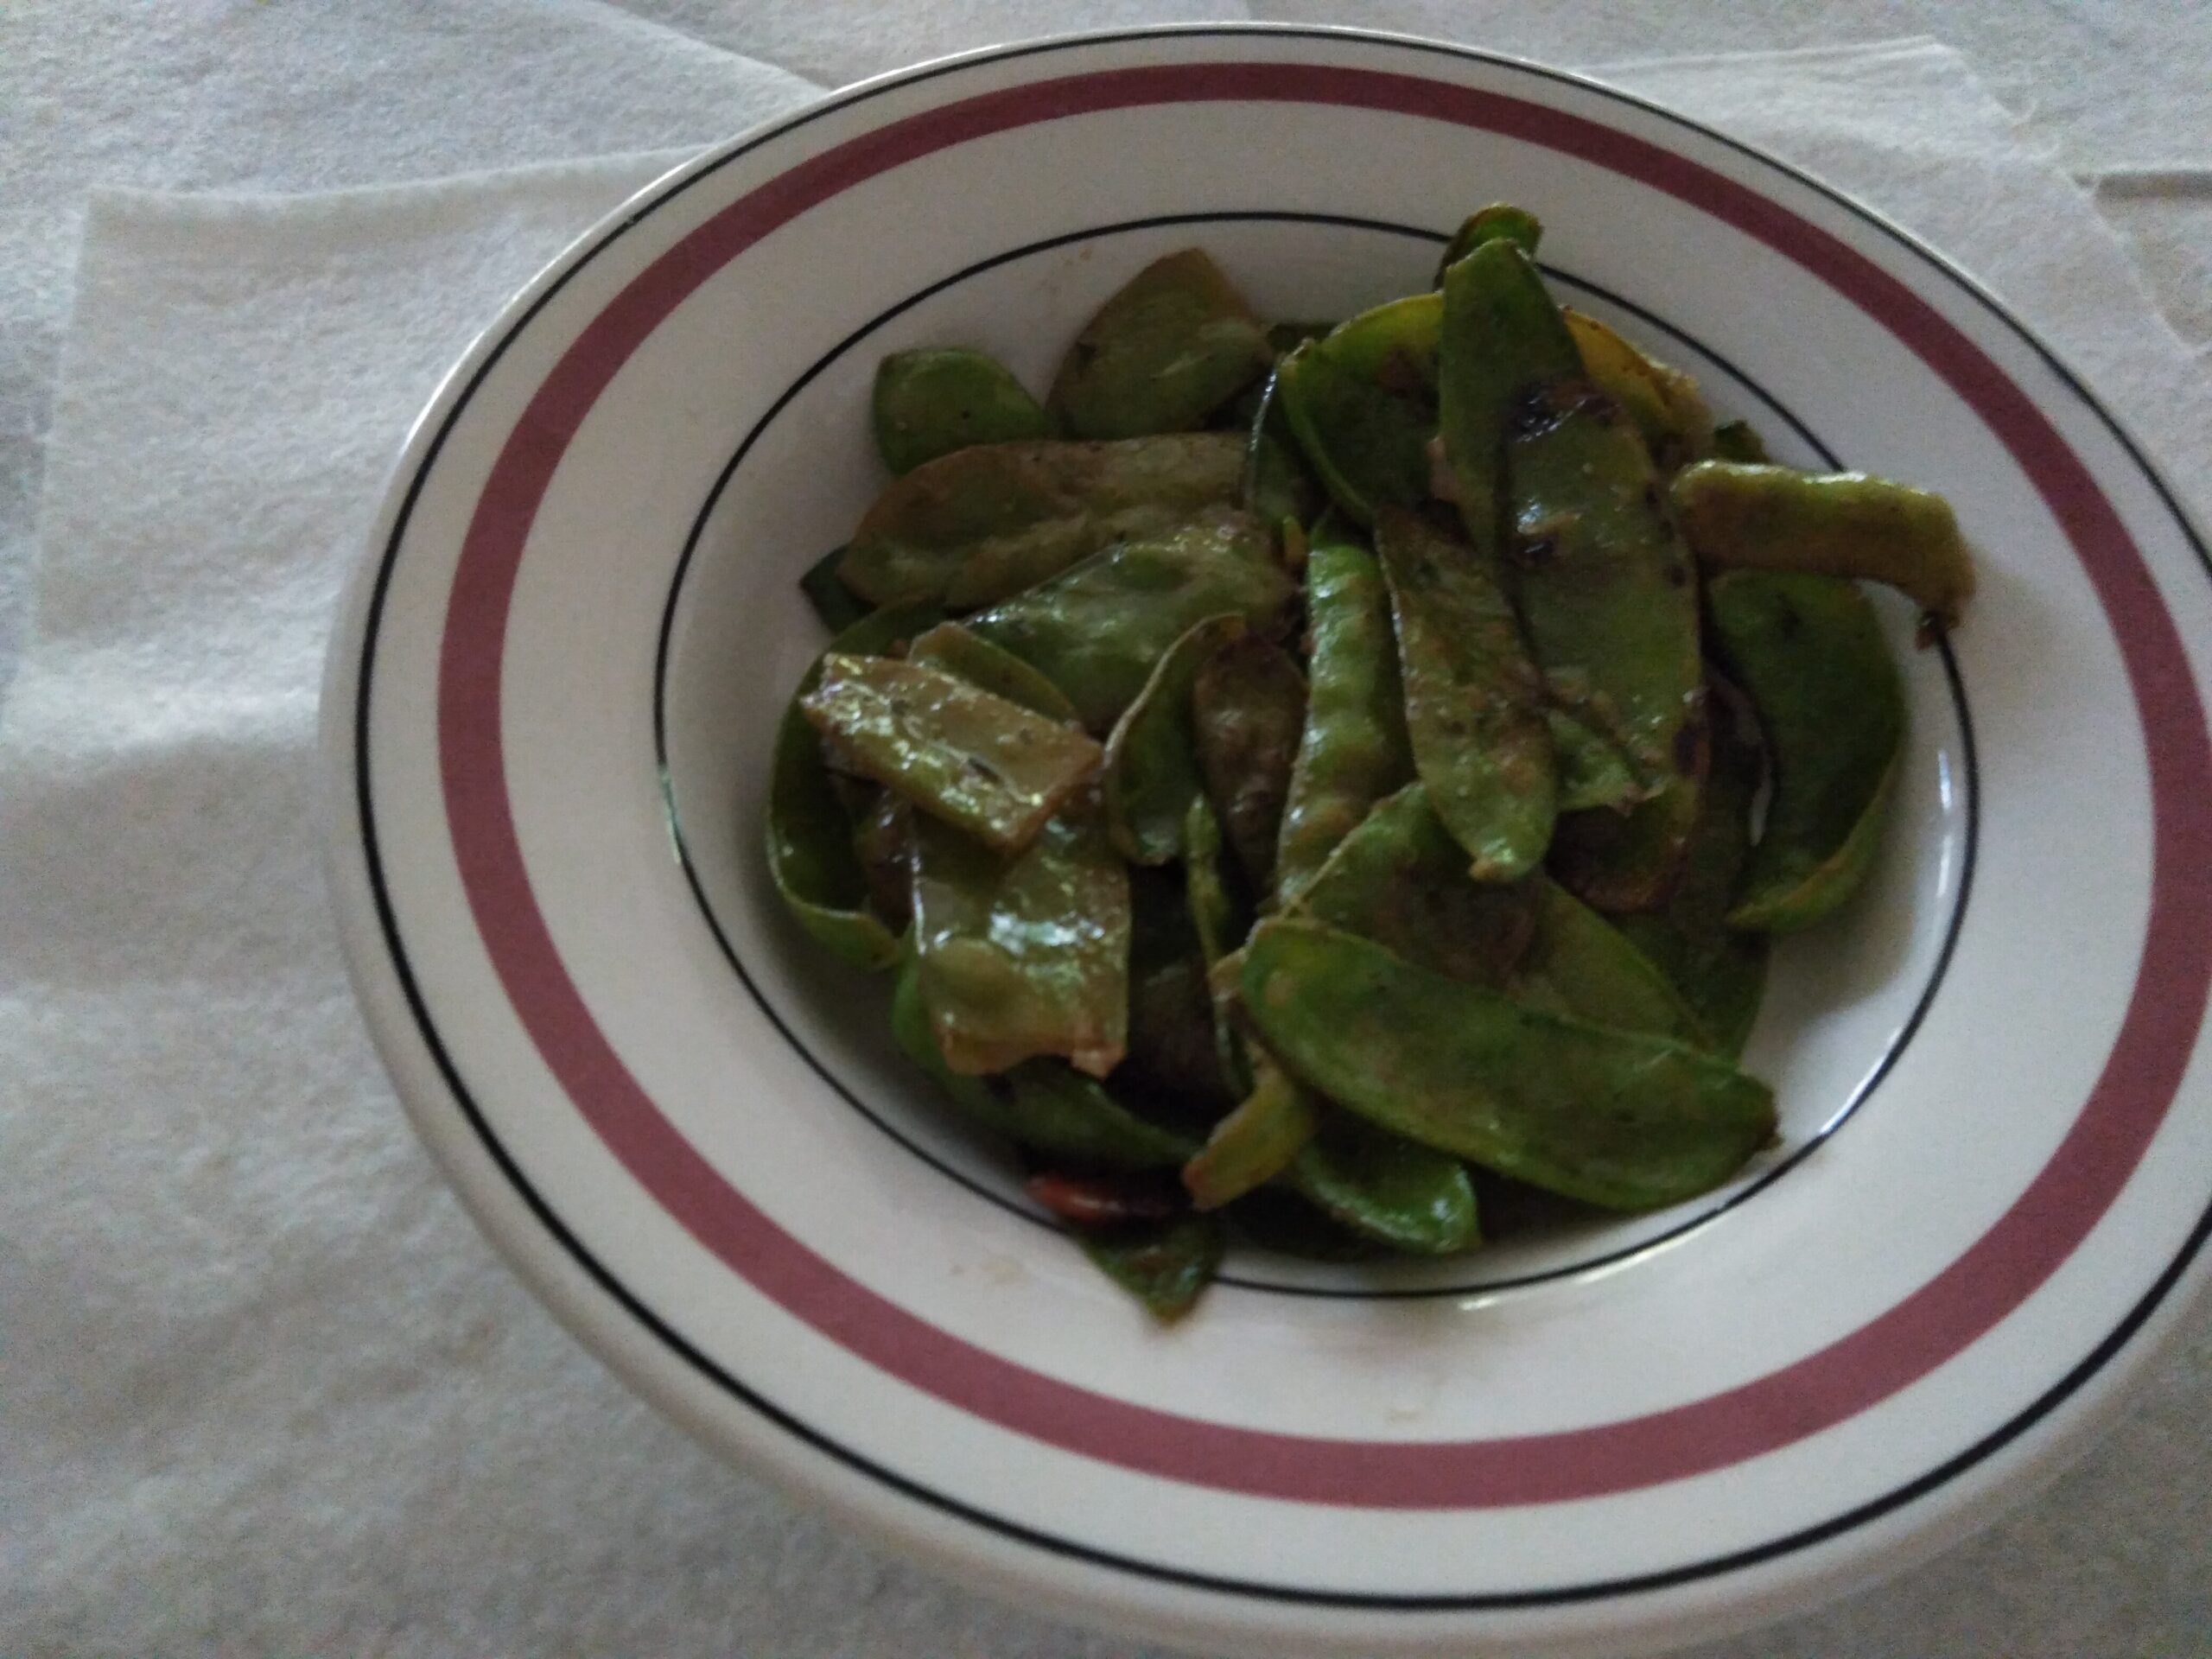 You are currently viewing Sauteed Snow Peas w/Parsley and Lemon